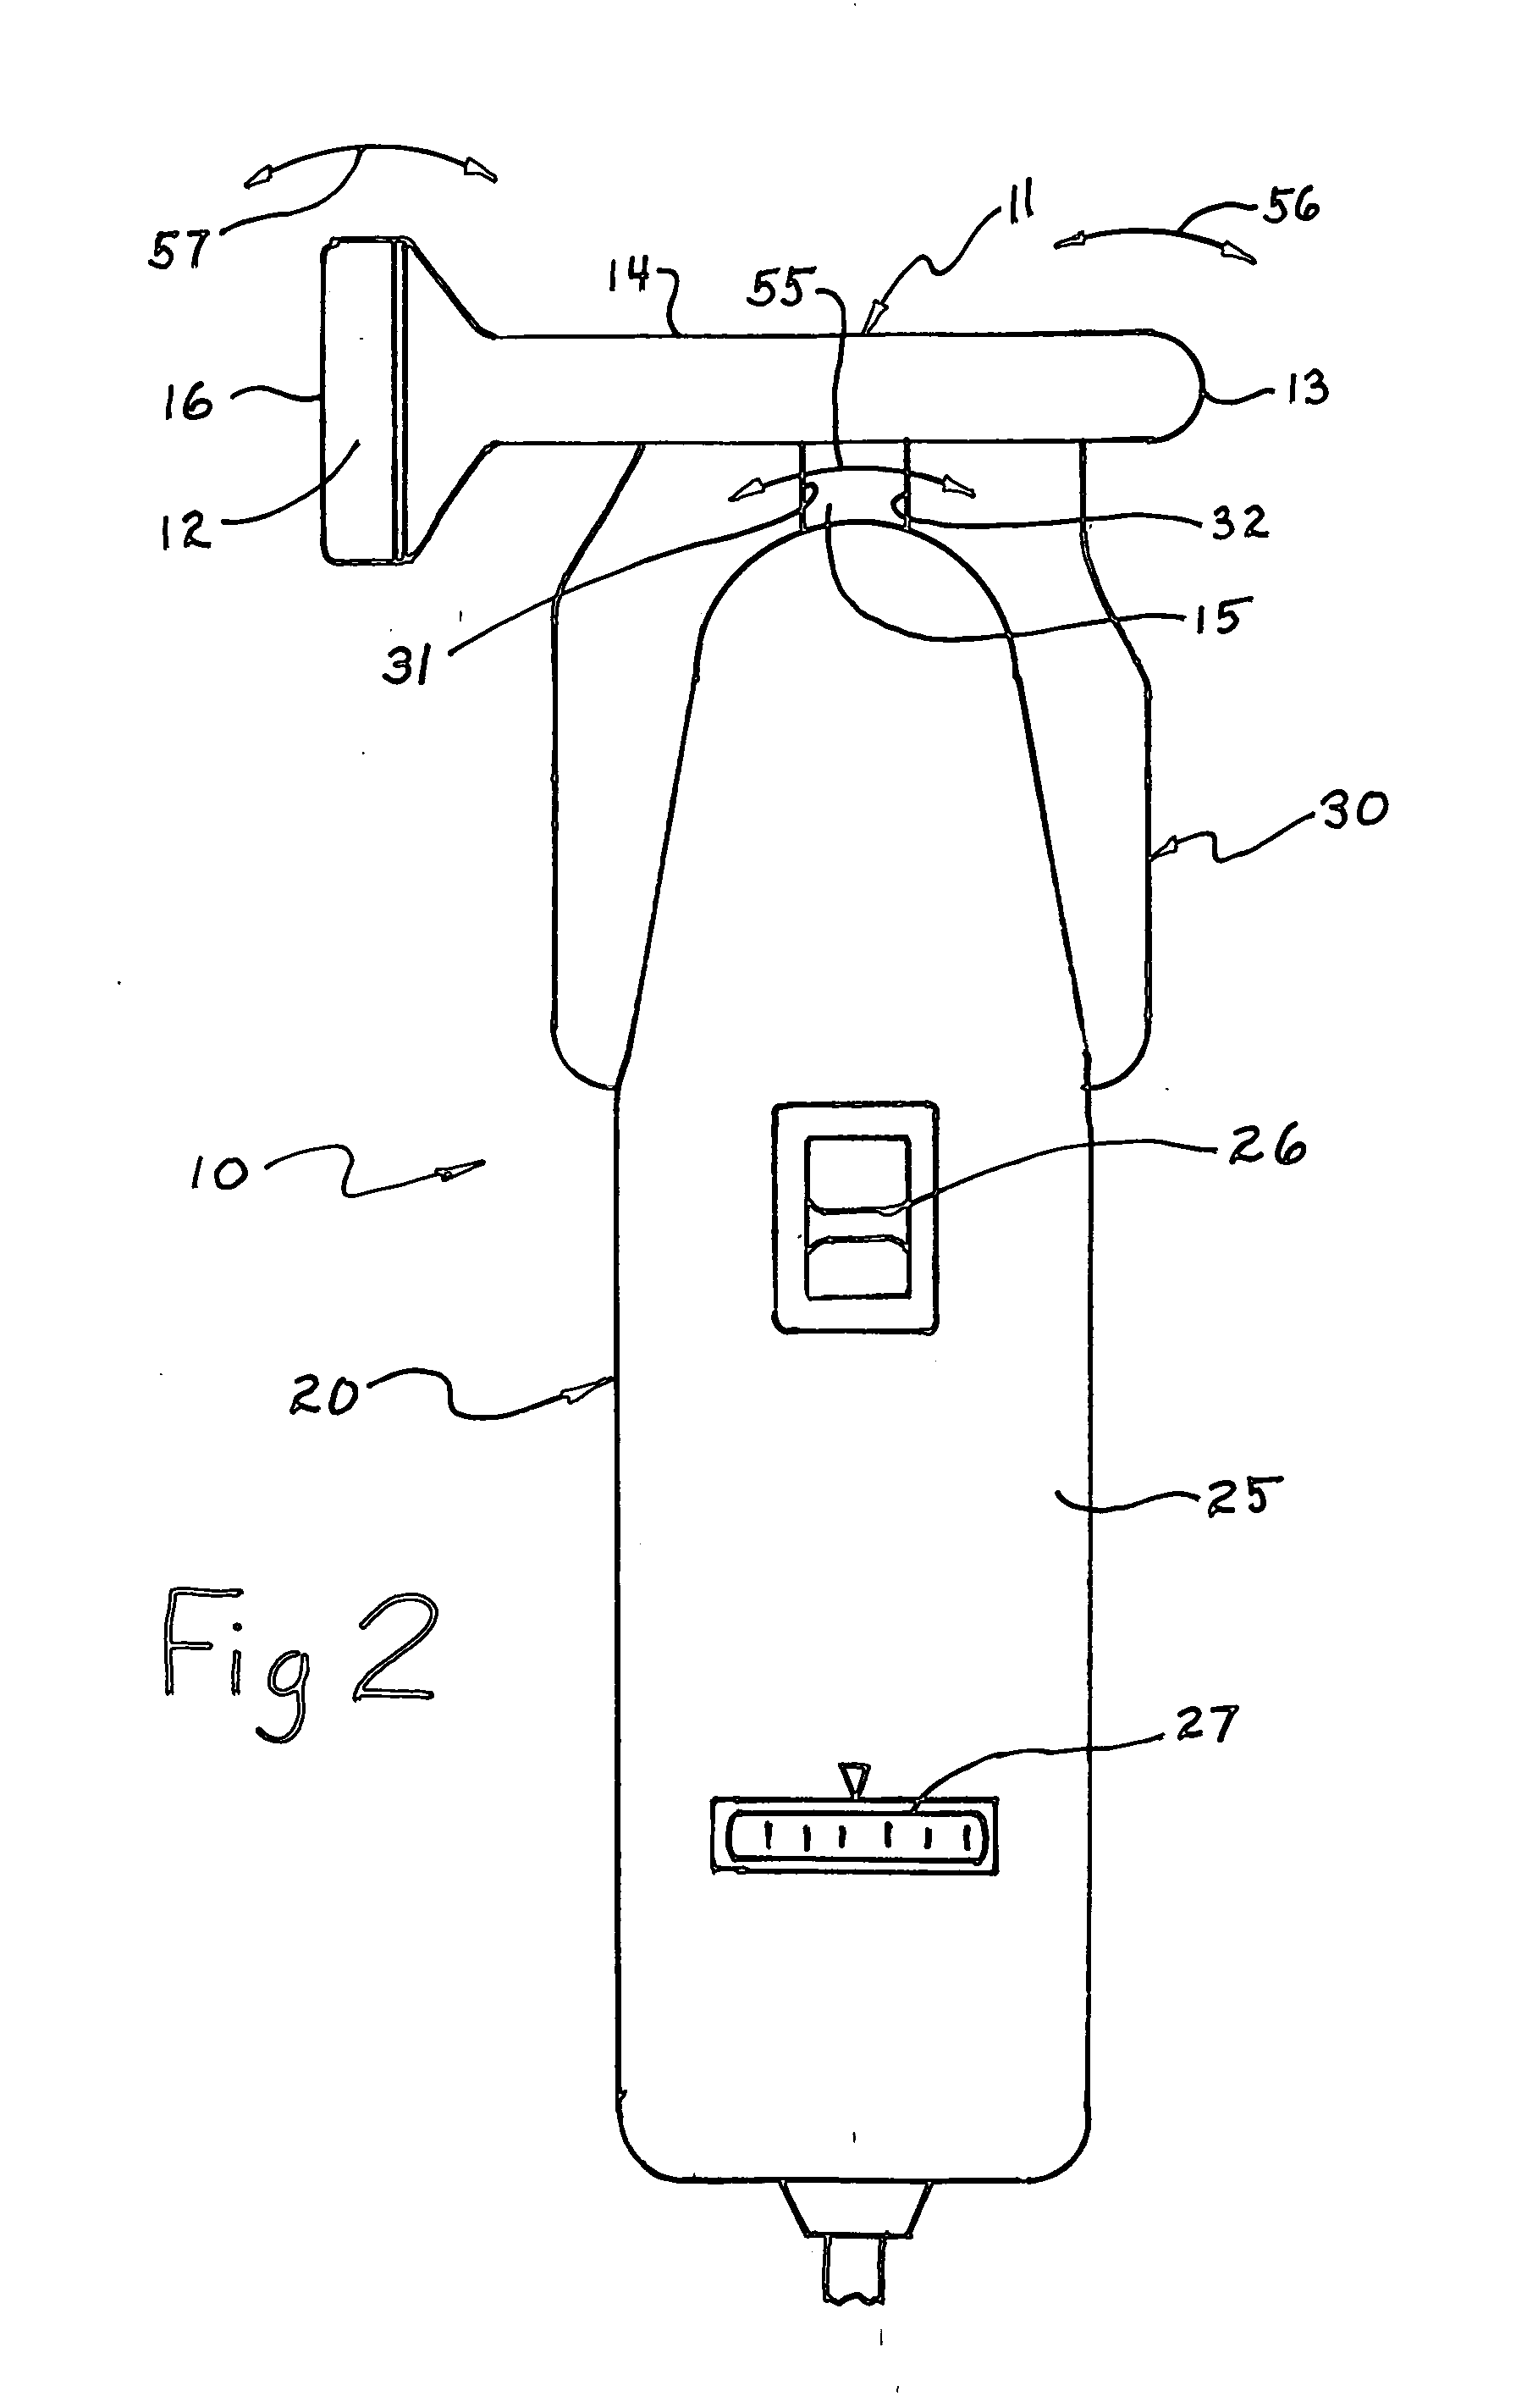 Therapeutic device and method for scar tissue therapy having intermediate and opposed heads